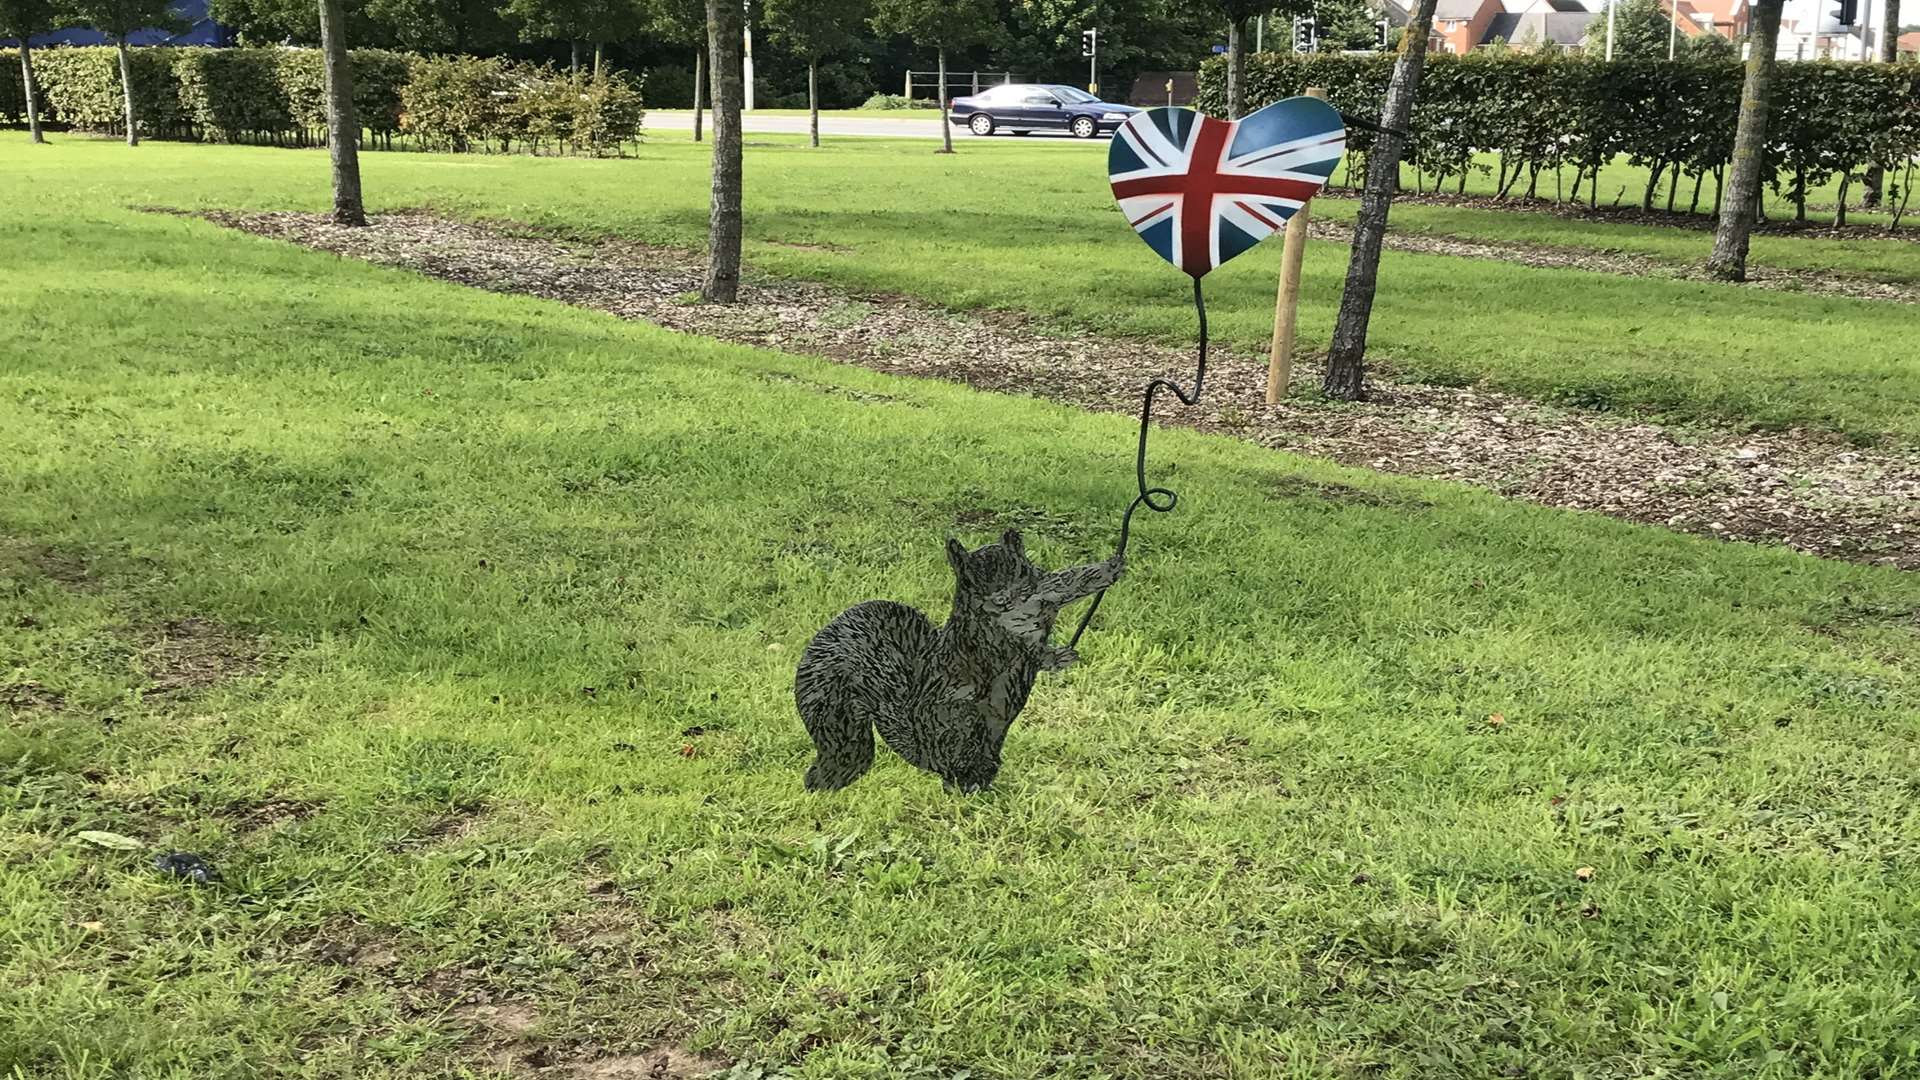 The squirrel sculpture appeared on the Drovers roundabout